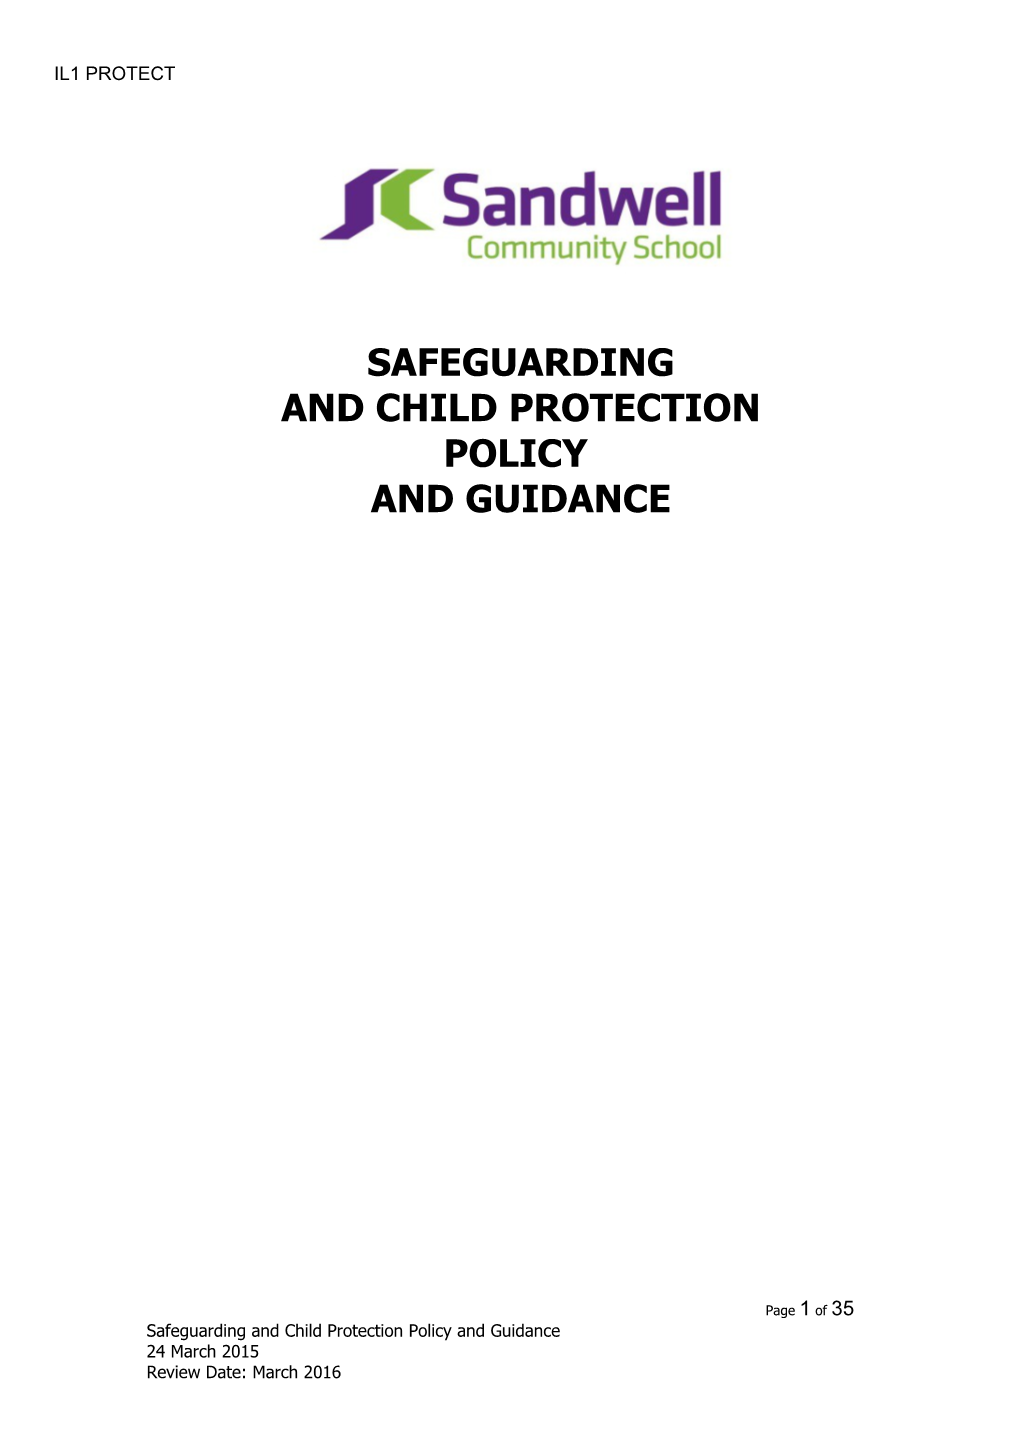 Safeguarding and Promoting the Welfare of Children